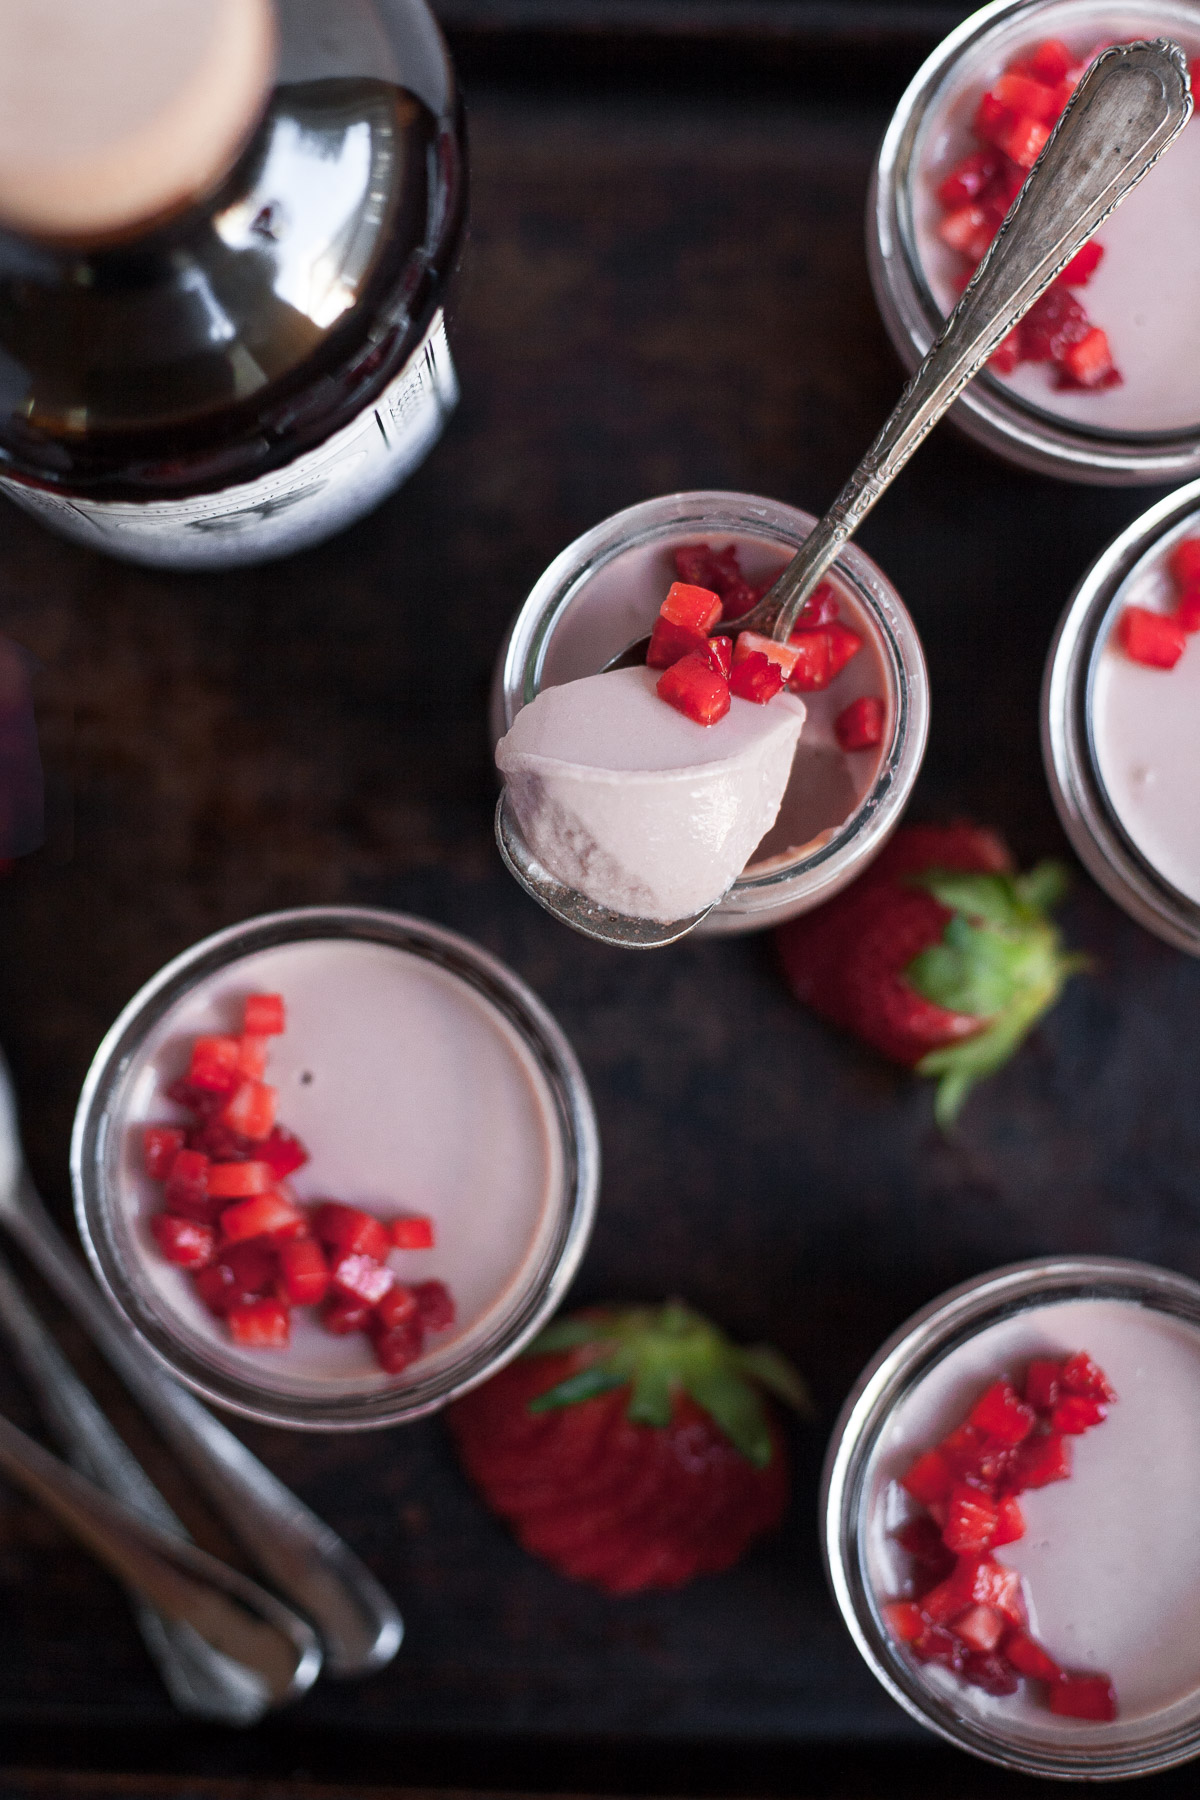 Strawberry Panna Cotta with Balsamic Vinegar (Paleo and dairy-free options)